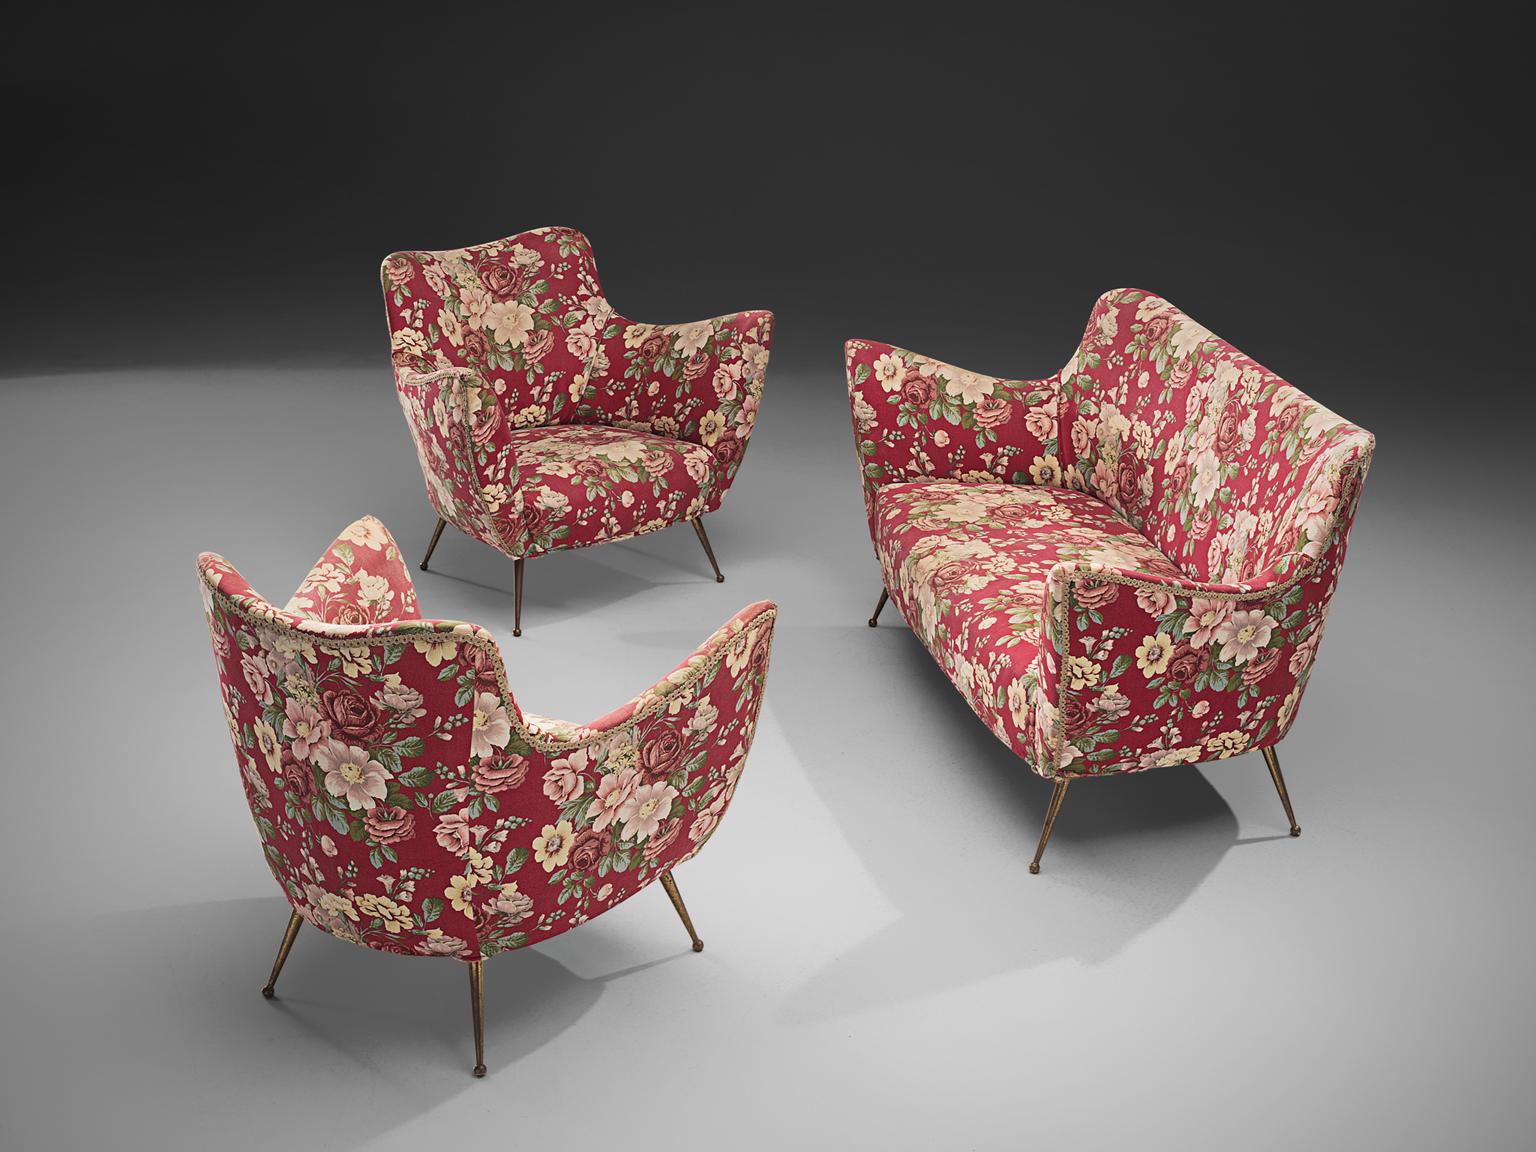 ISA Bergamo, lounge set, floral pink and red fabric, brass, Italy, 1950s. 

This set is an iconic example of Italian design from the 1950s. Organic and sculptural, this two-seat sofa and two matching lounge chairs are anything but minimalistic.